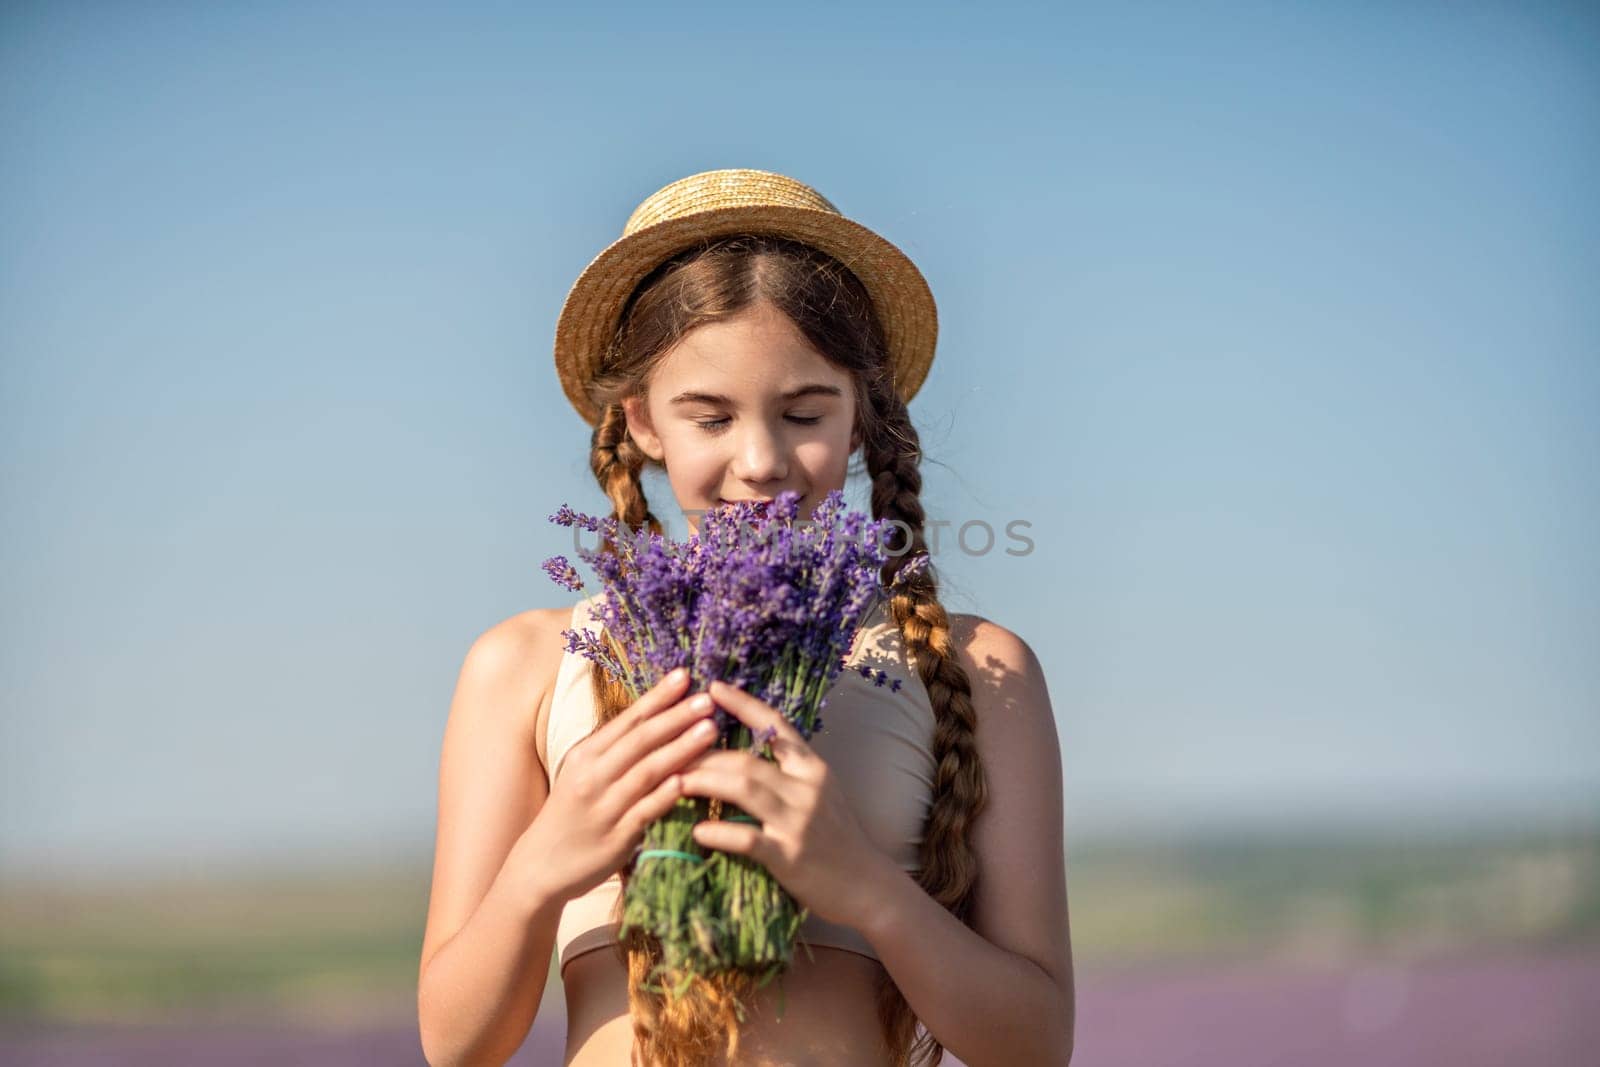 girl is holding a bunch of lavender purple flowers in her hands and wearing a straw hat. She is smiling and she is enjoying herself. The scene is set in a field of lavender, which adds to the peaceful. by Matiunina